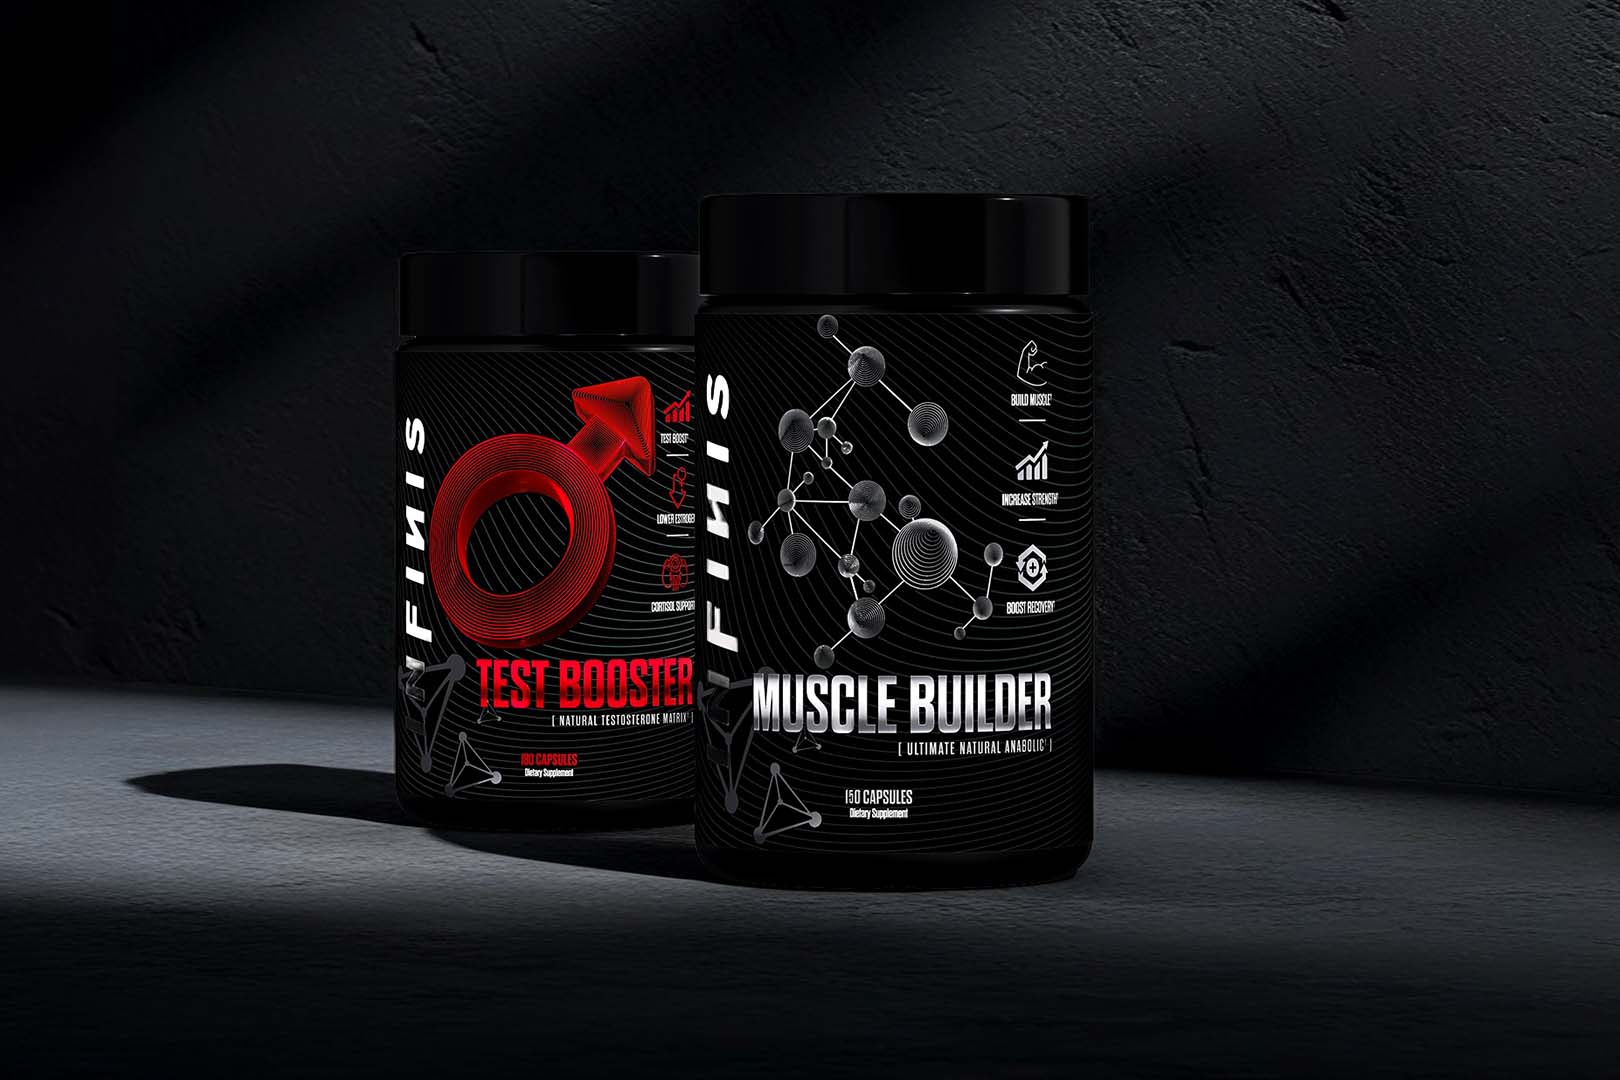 Infinis Nutrition Also Dropping Muscle Builder